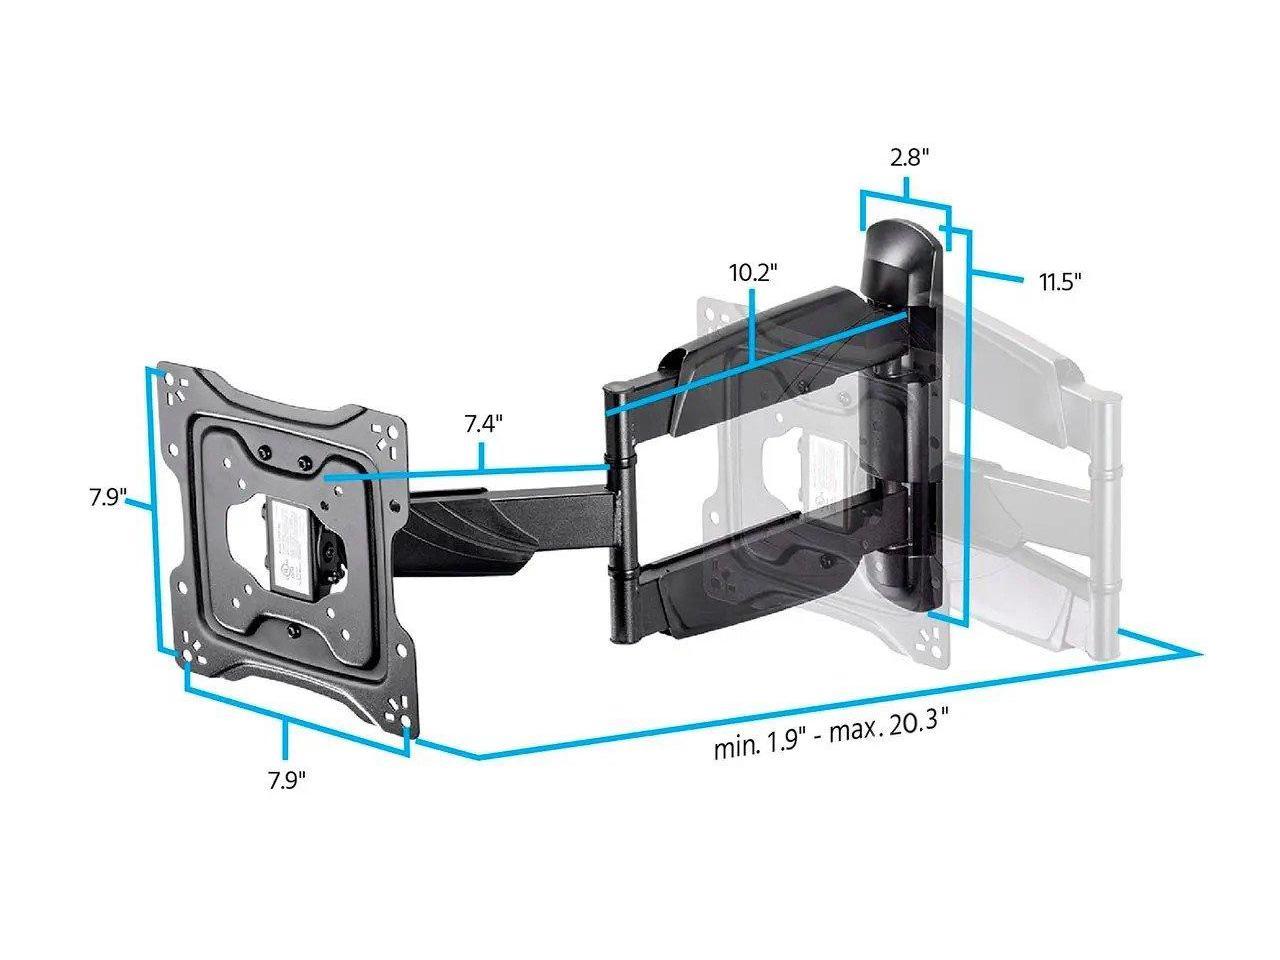 Monoprice Full-Motion Articulating TV Wall Mount Bracket - For LED TVs 24in to 55in, Max Weight 77 Lbs., VESA Patterns Up to 400x400, Rotating, Low Profile, UL Certified - Commercial Series - image 2 of 20